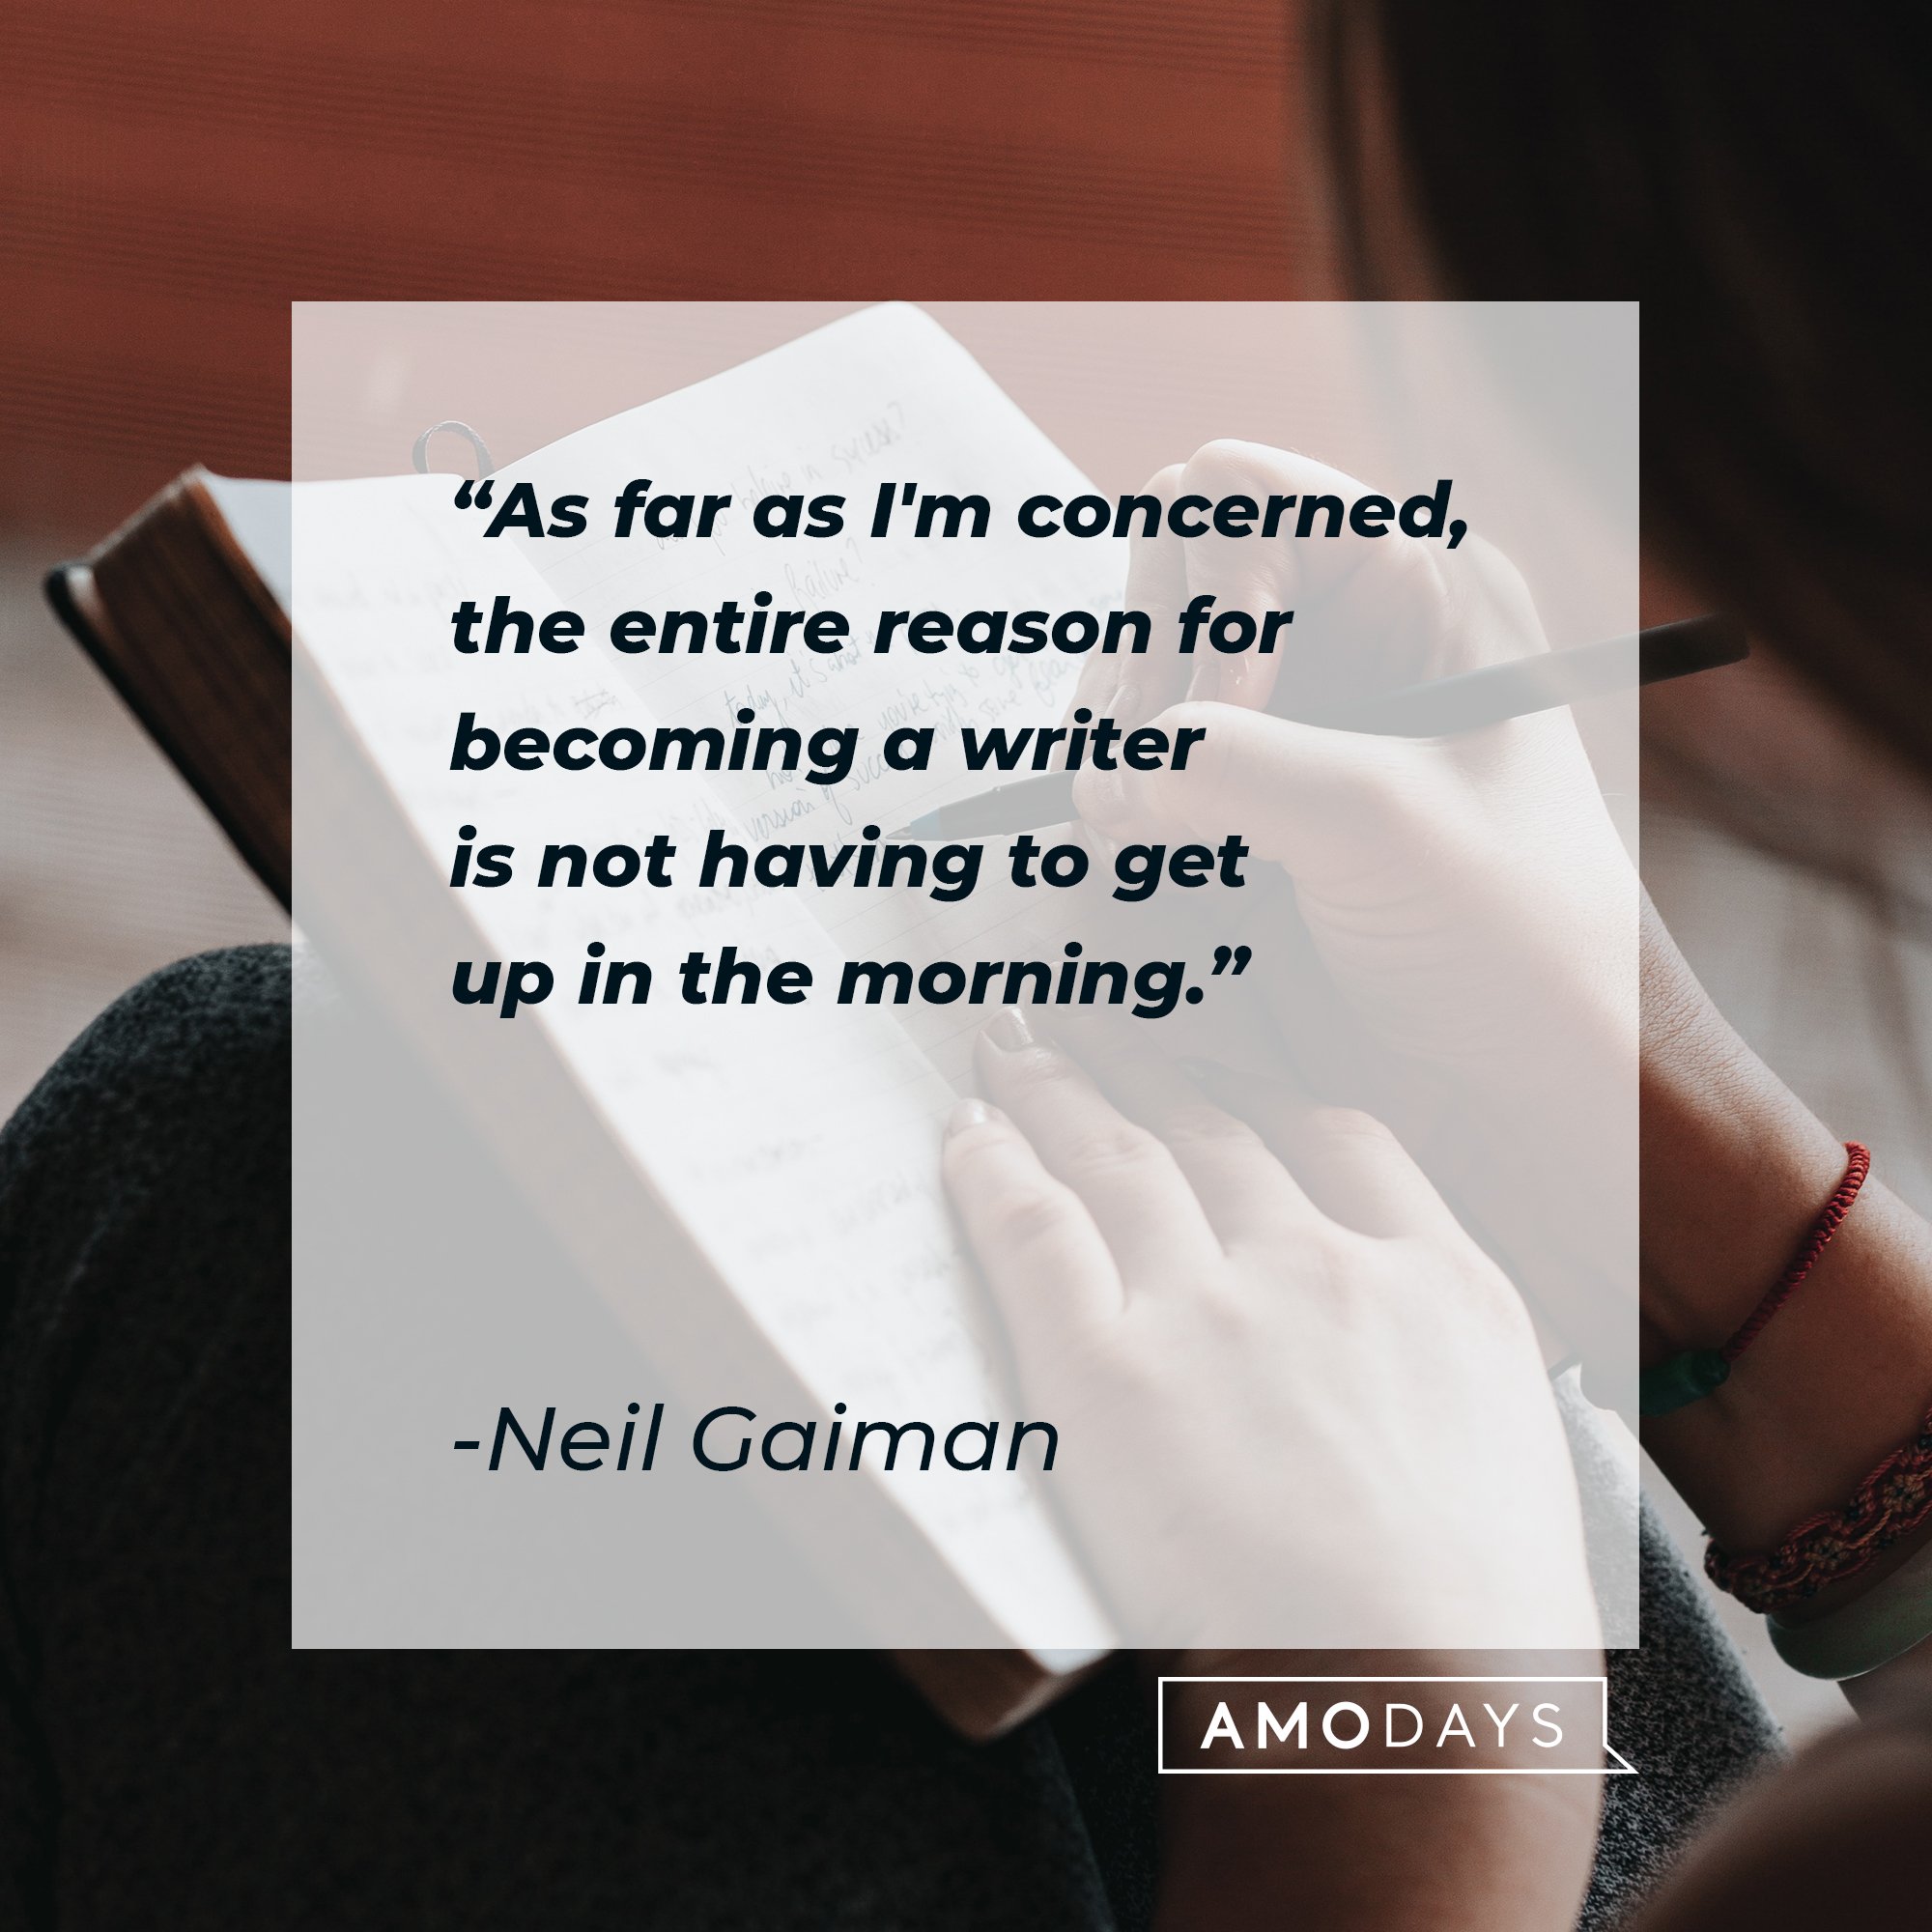  Neil Gaiman’s quote: "As far as I'm concerned, the entire reason for becoming a writer is not having to get up in the morning." | Image: AmoDays